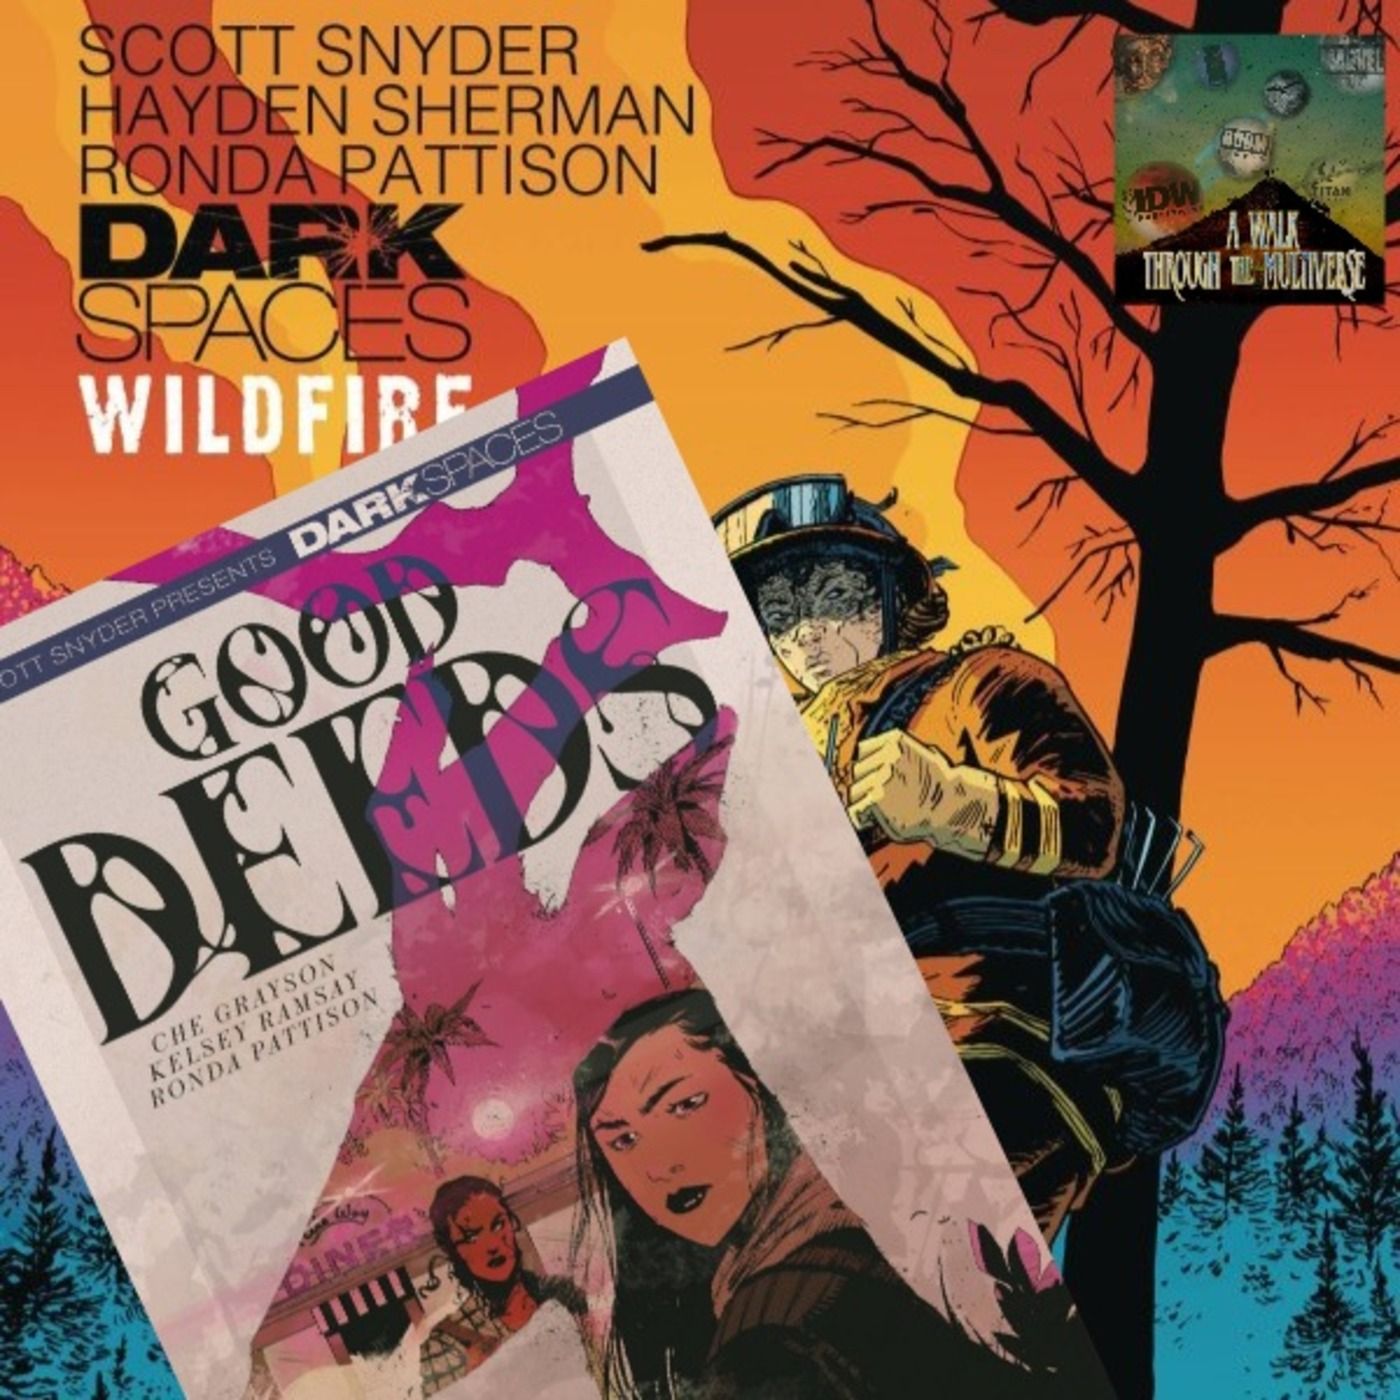 Dark Spaces: Wildfire Review and Dark Spaces: Good Deeds First Look - A Walk Through The Multiverse Episode 59